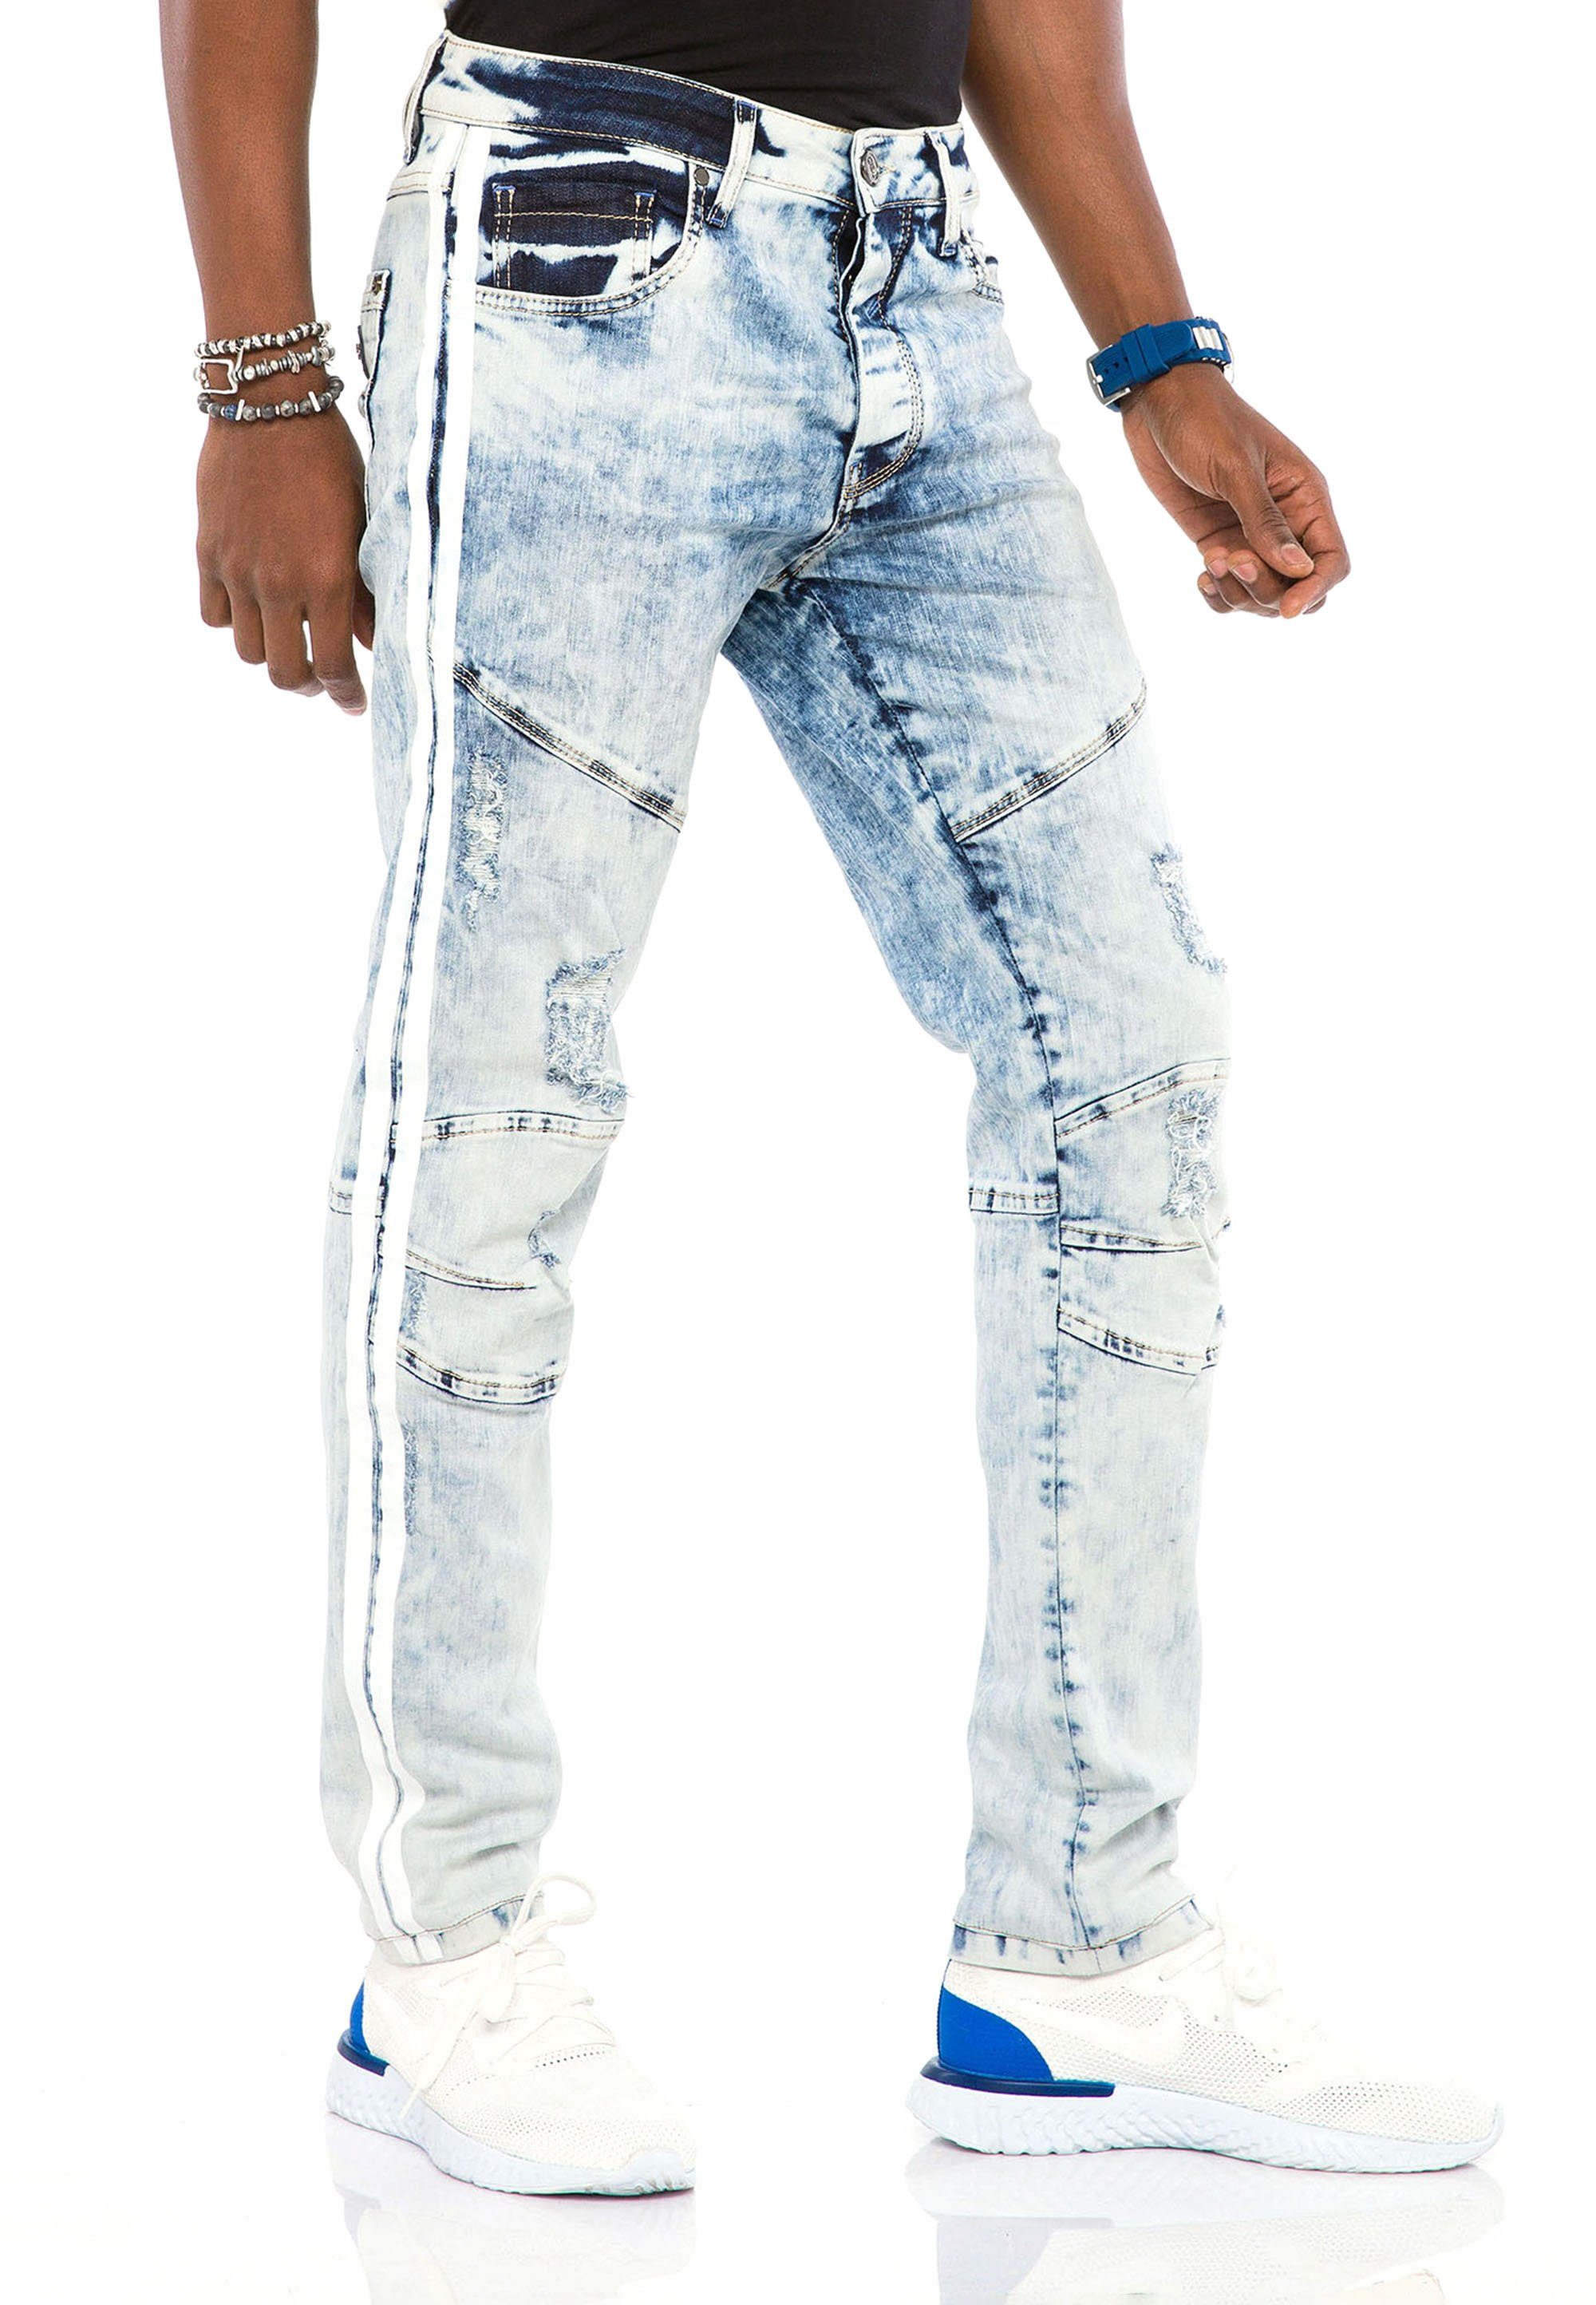 Cipo & Jeans Straight Used-Lookn im Baxx Fit Bequeme